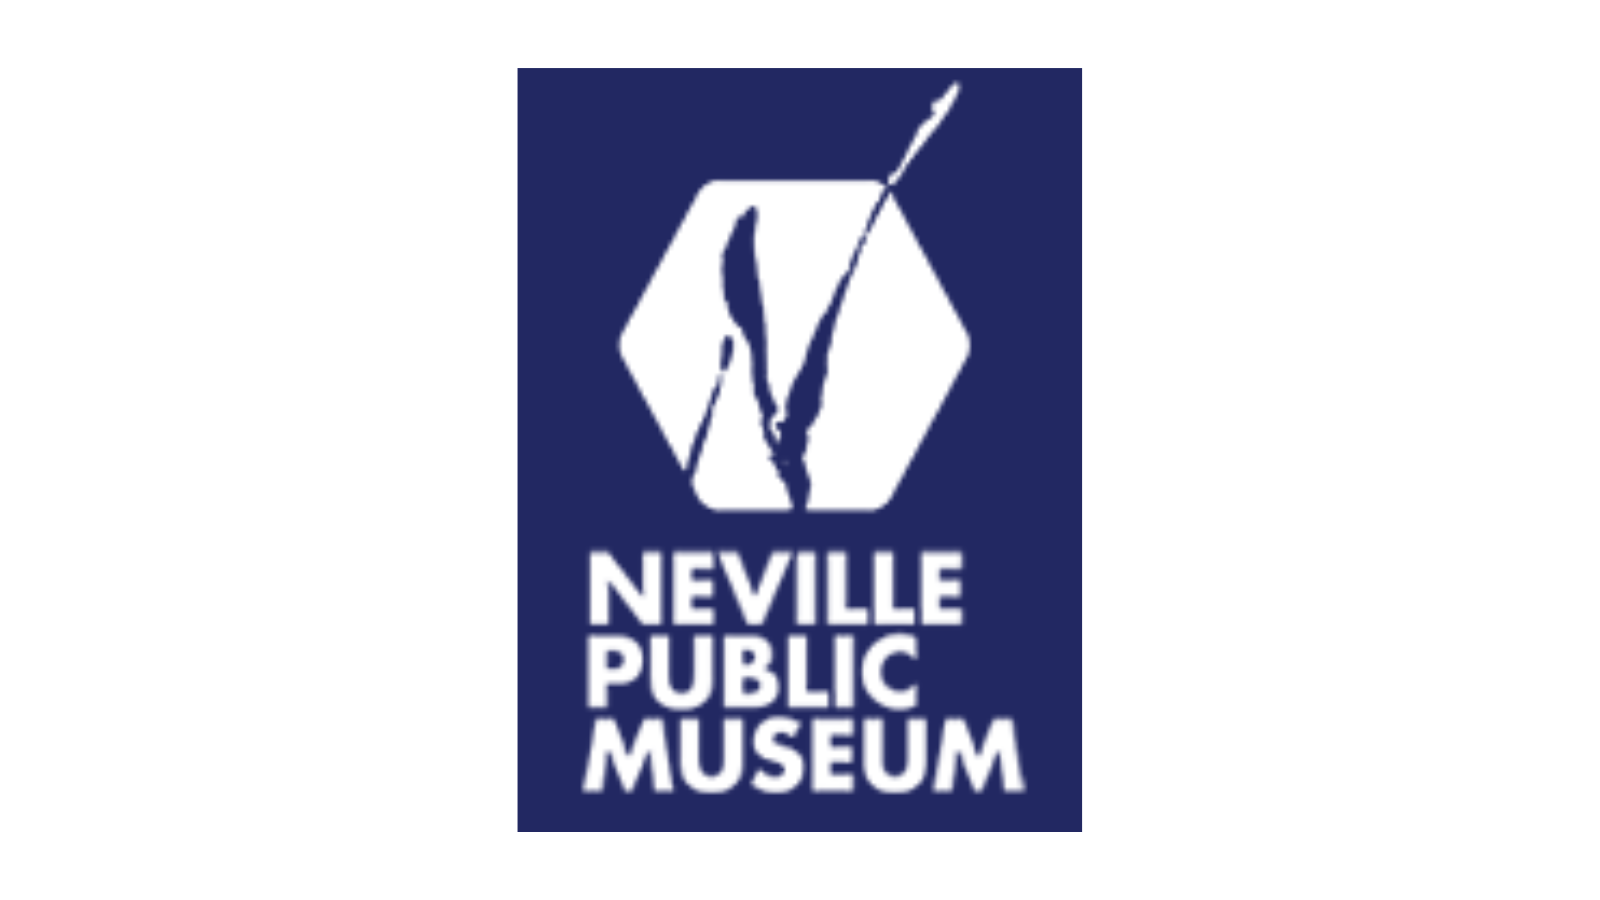 Neville Public Museum offers summer camps for kids.